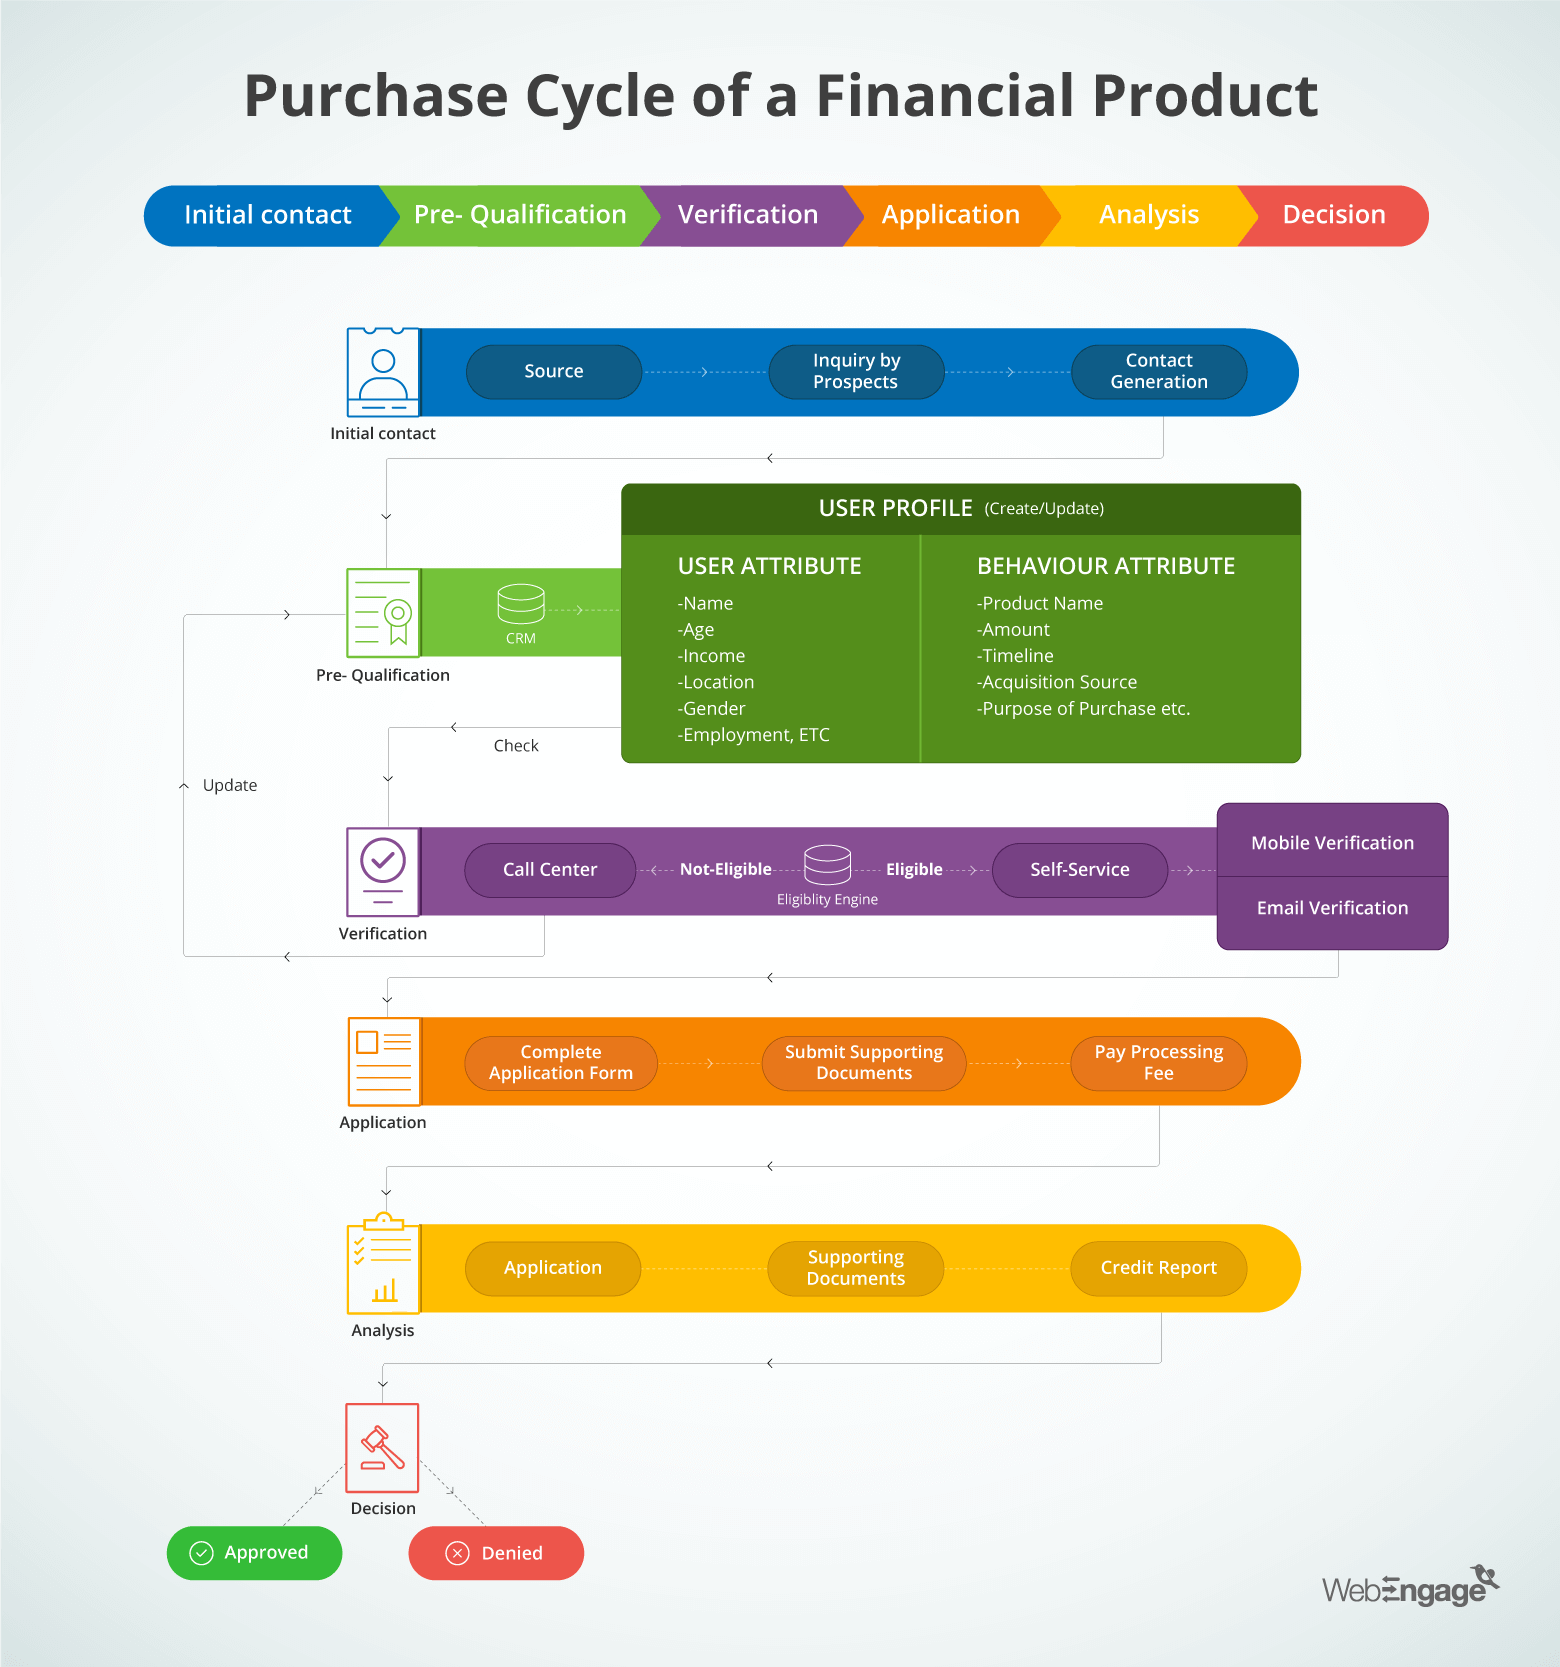 Purchase Cycle flow of Financial Product explained